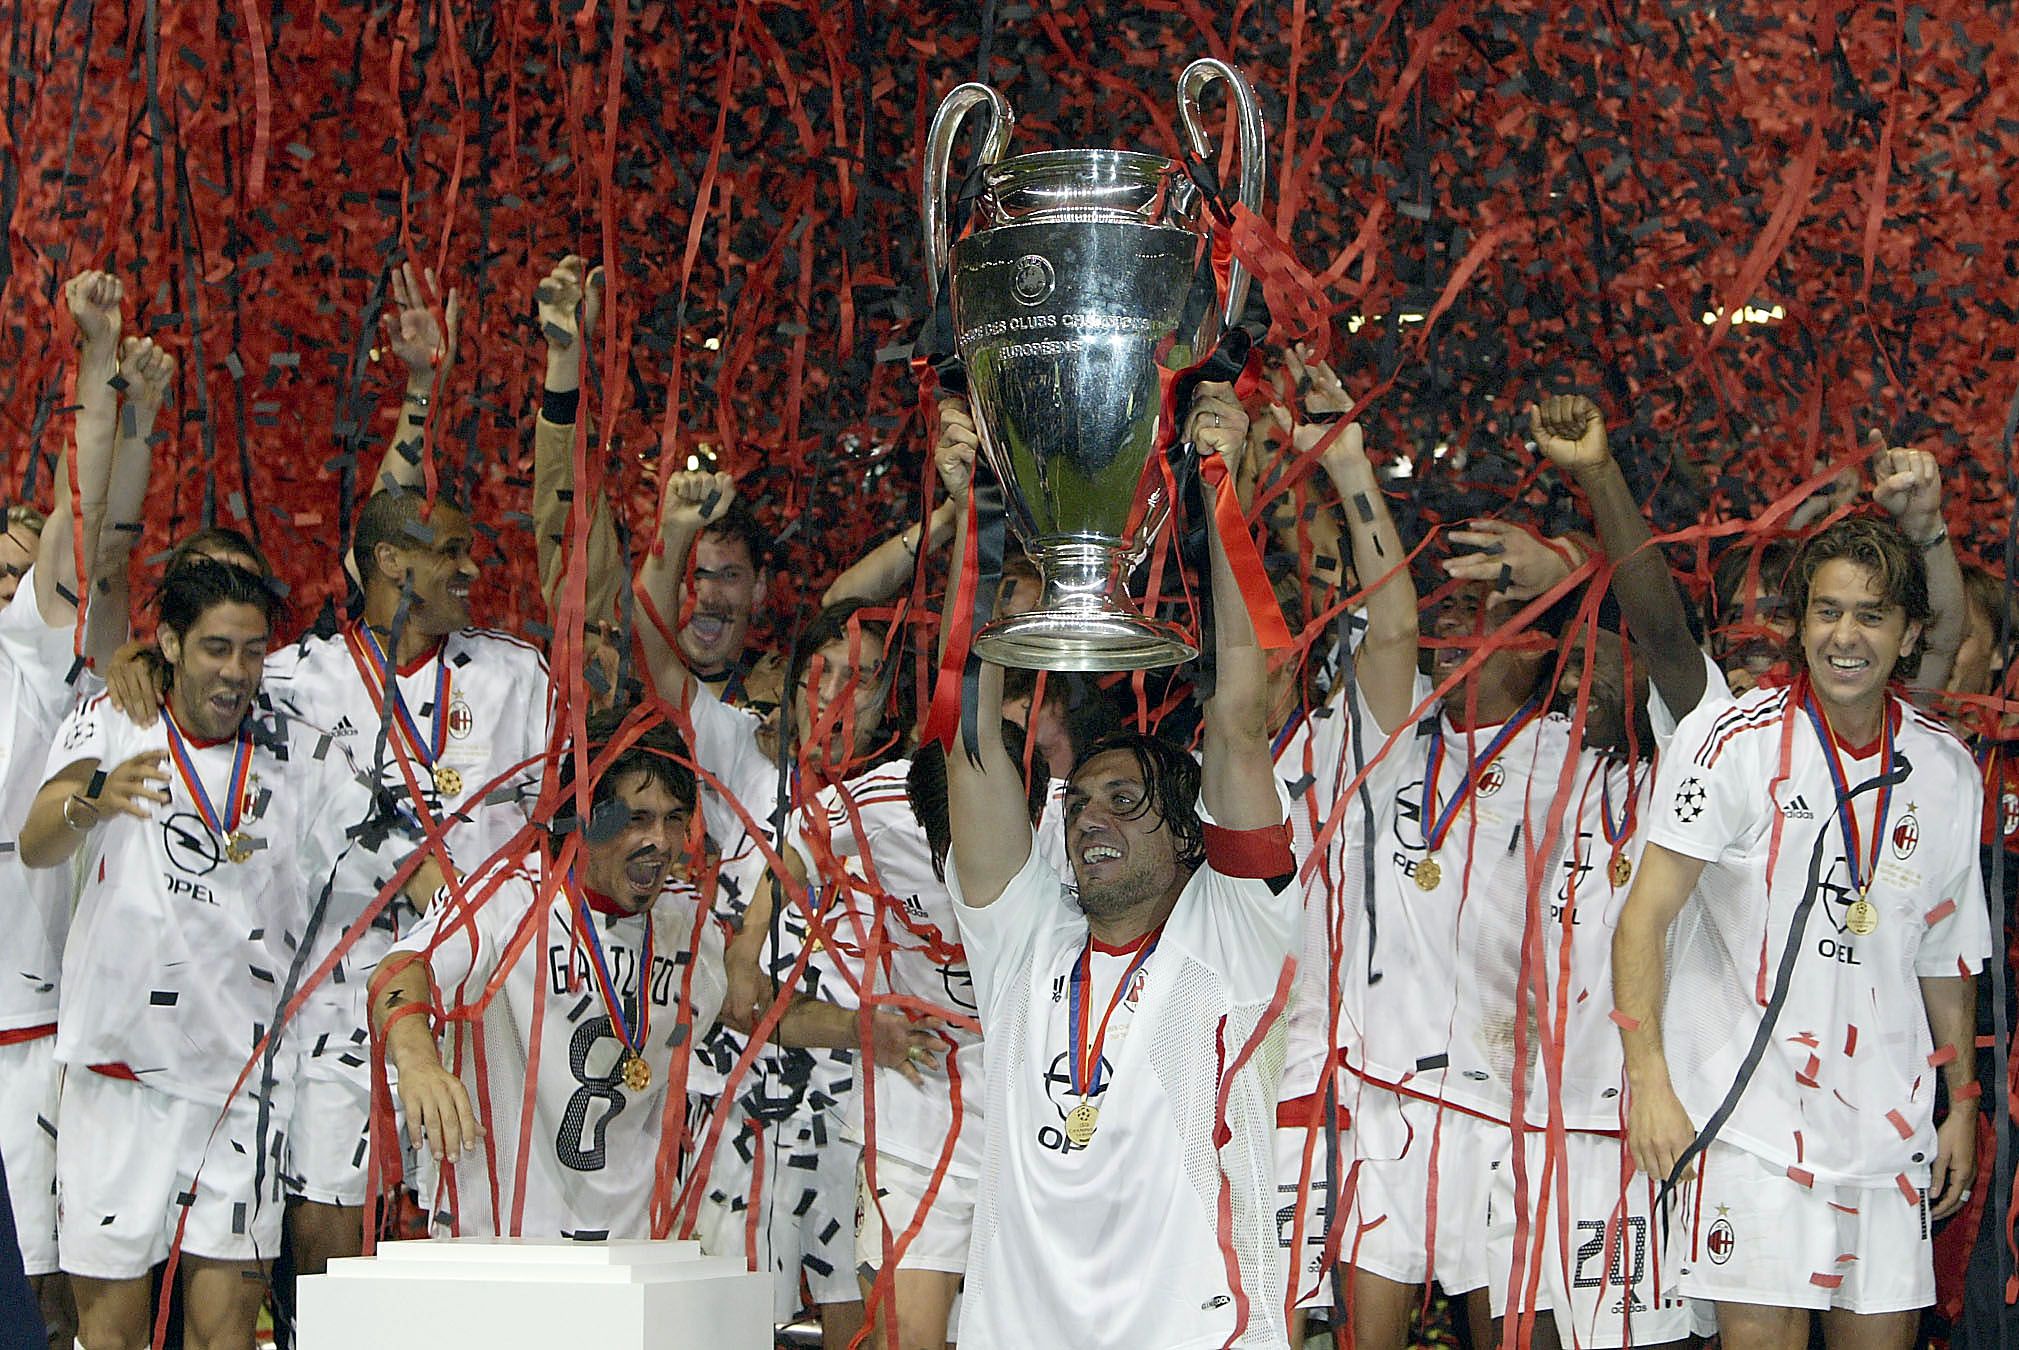 Captain Paolo Maldini if Milan lifts the trophy after winning the UEFA Champions League Final match between Juventus FC and AC Milan on May 28, 2003 at Old Trafford in Manchester, England